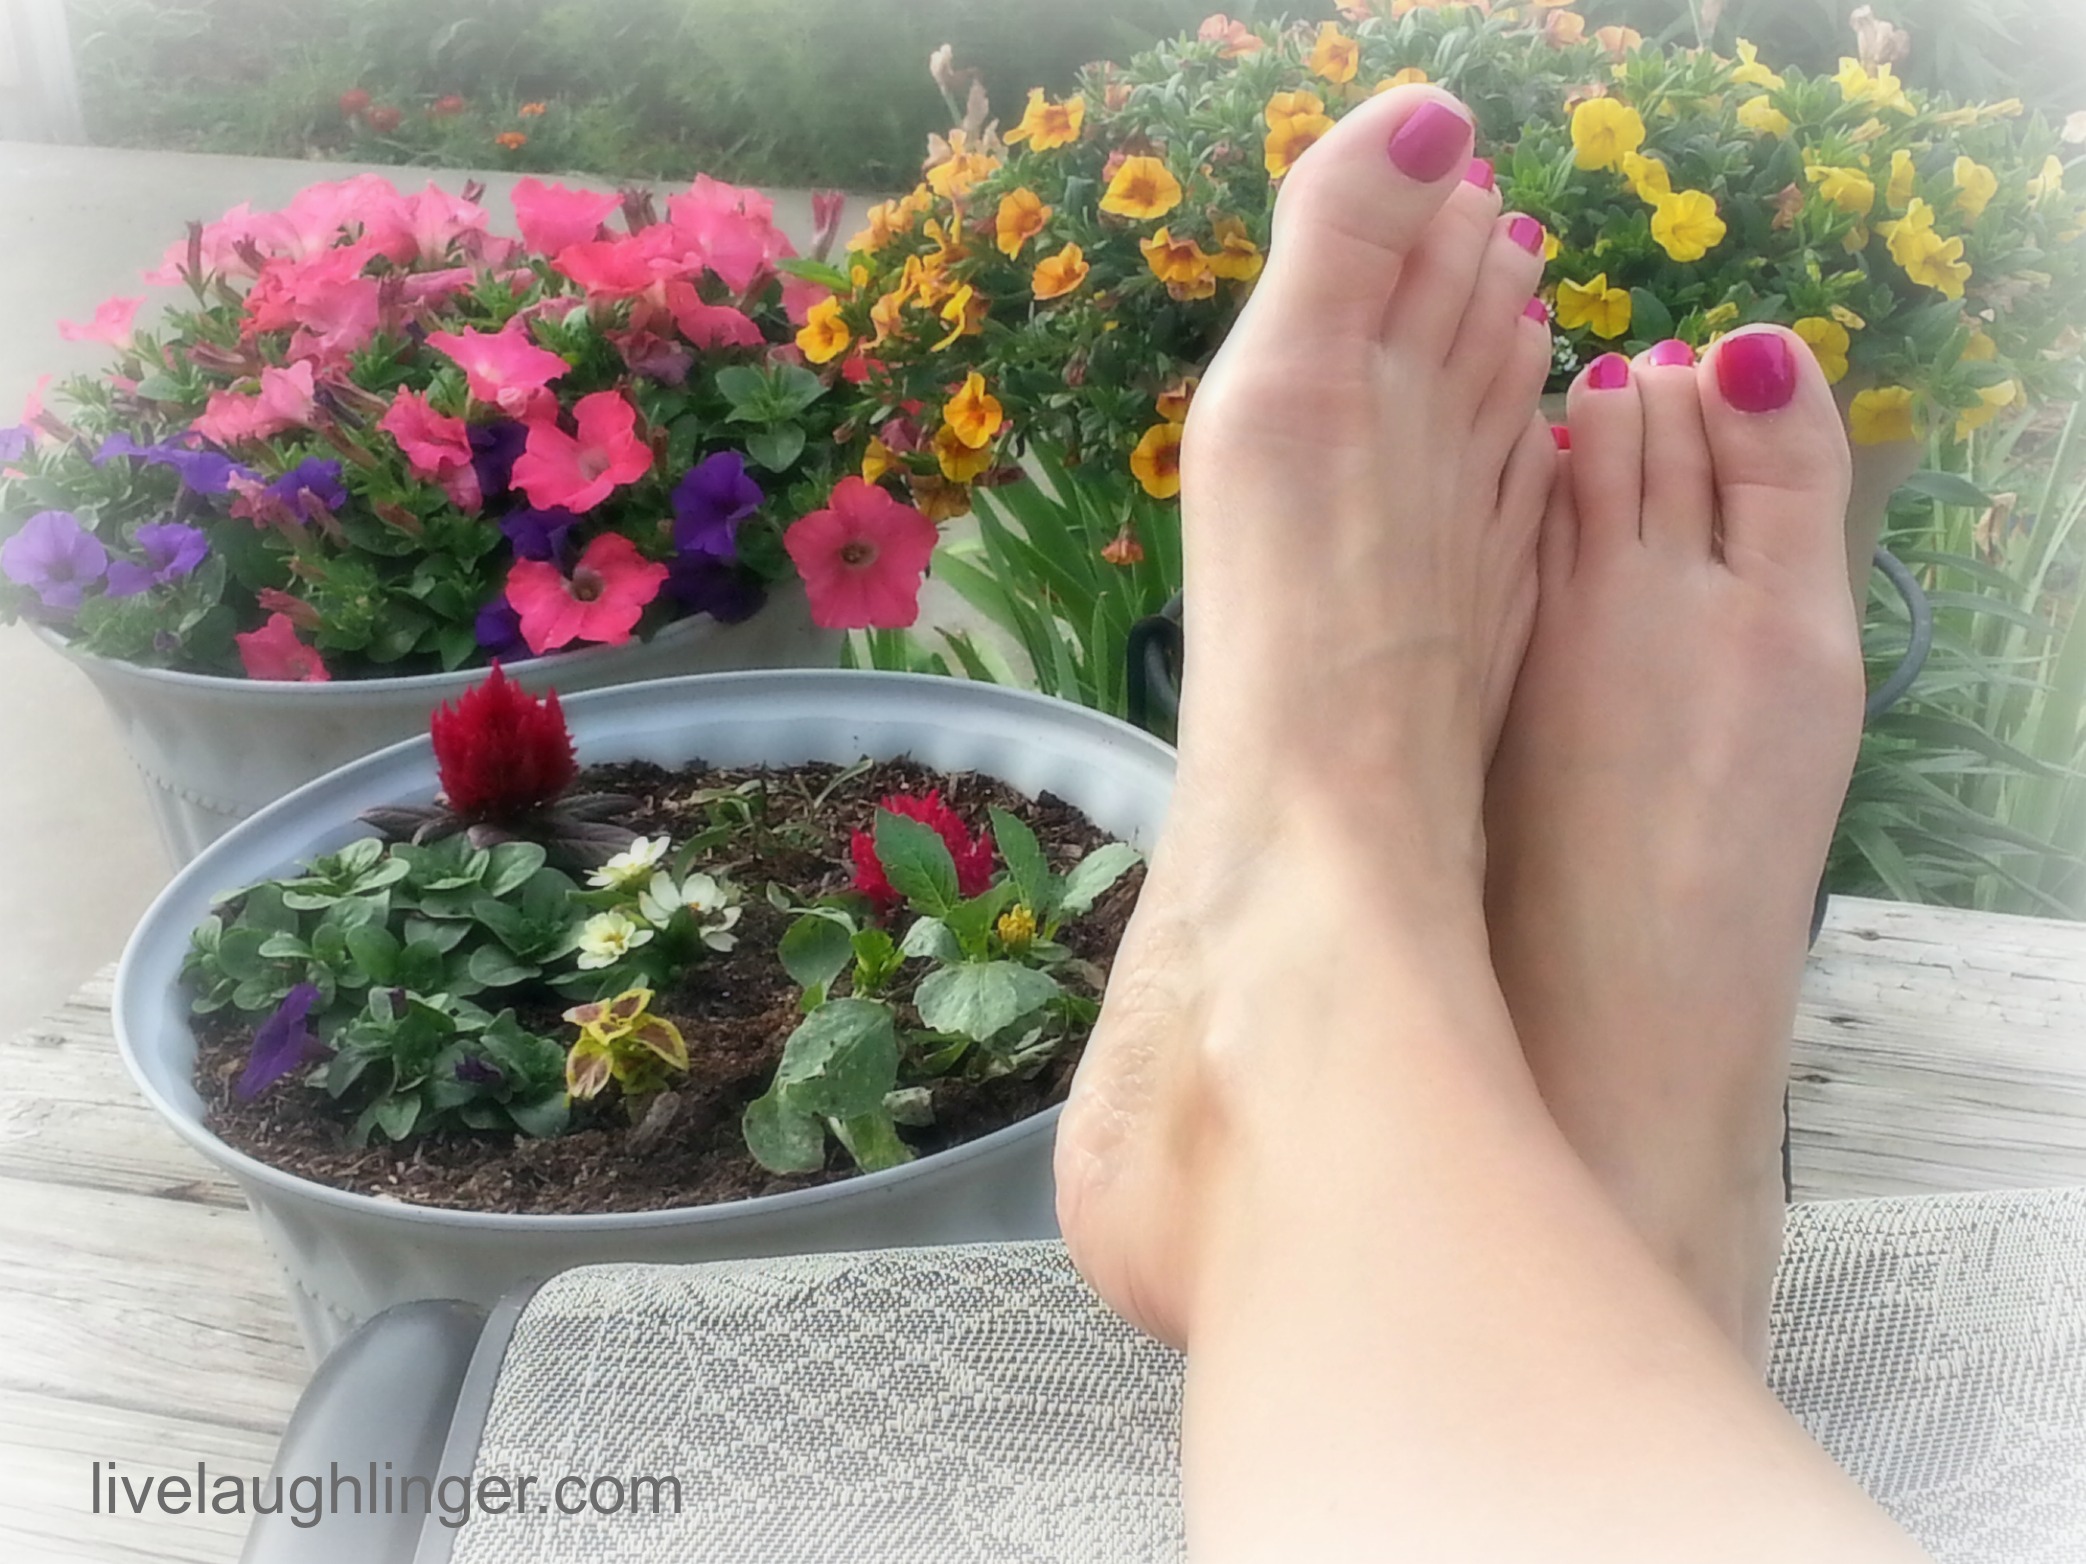 The Perfect At-Home Summer Pedicure